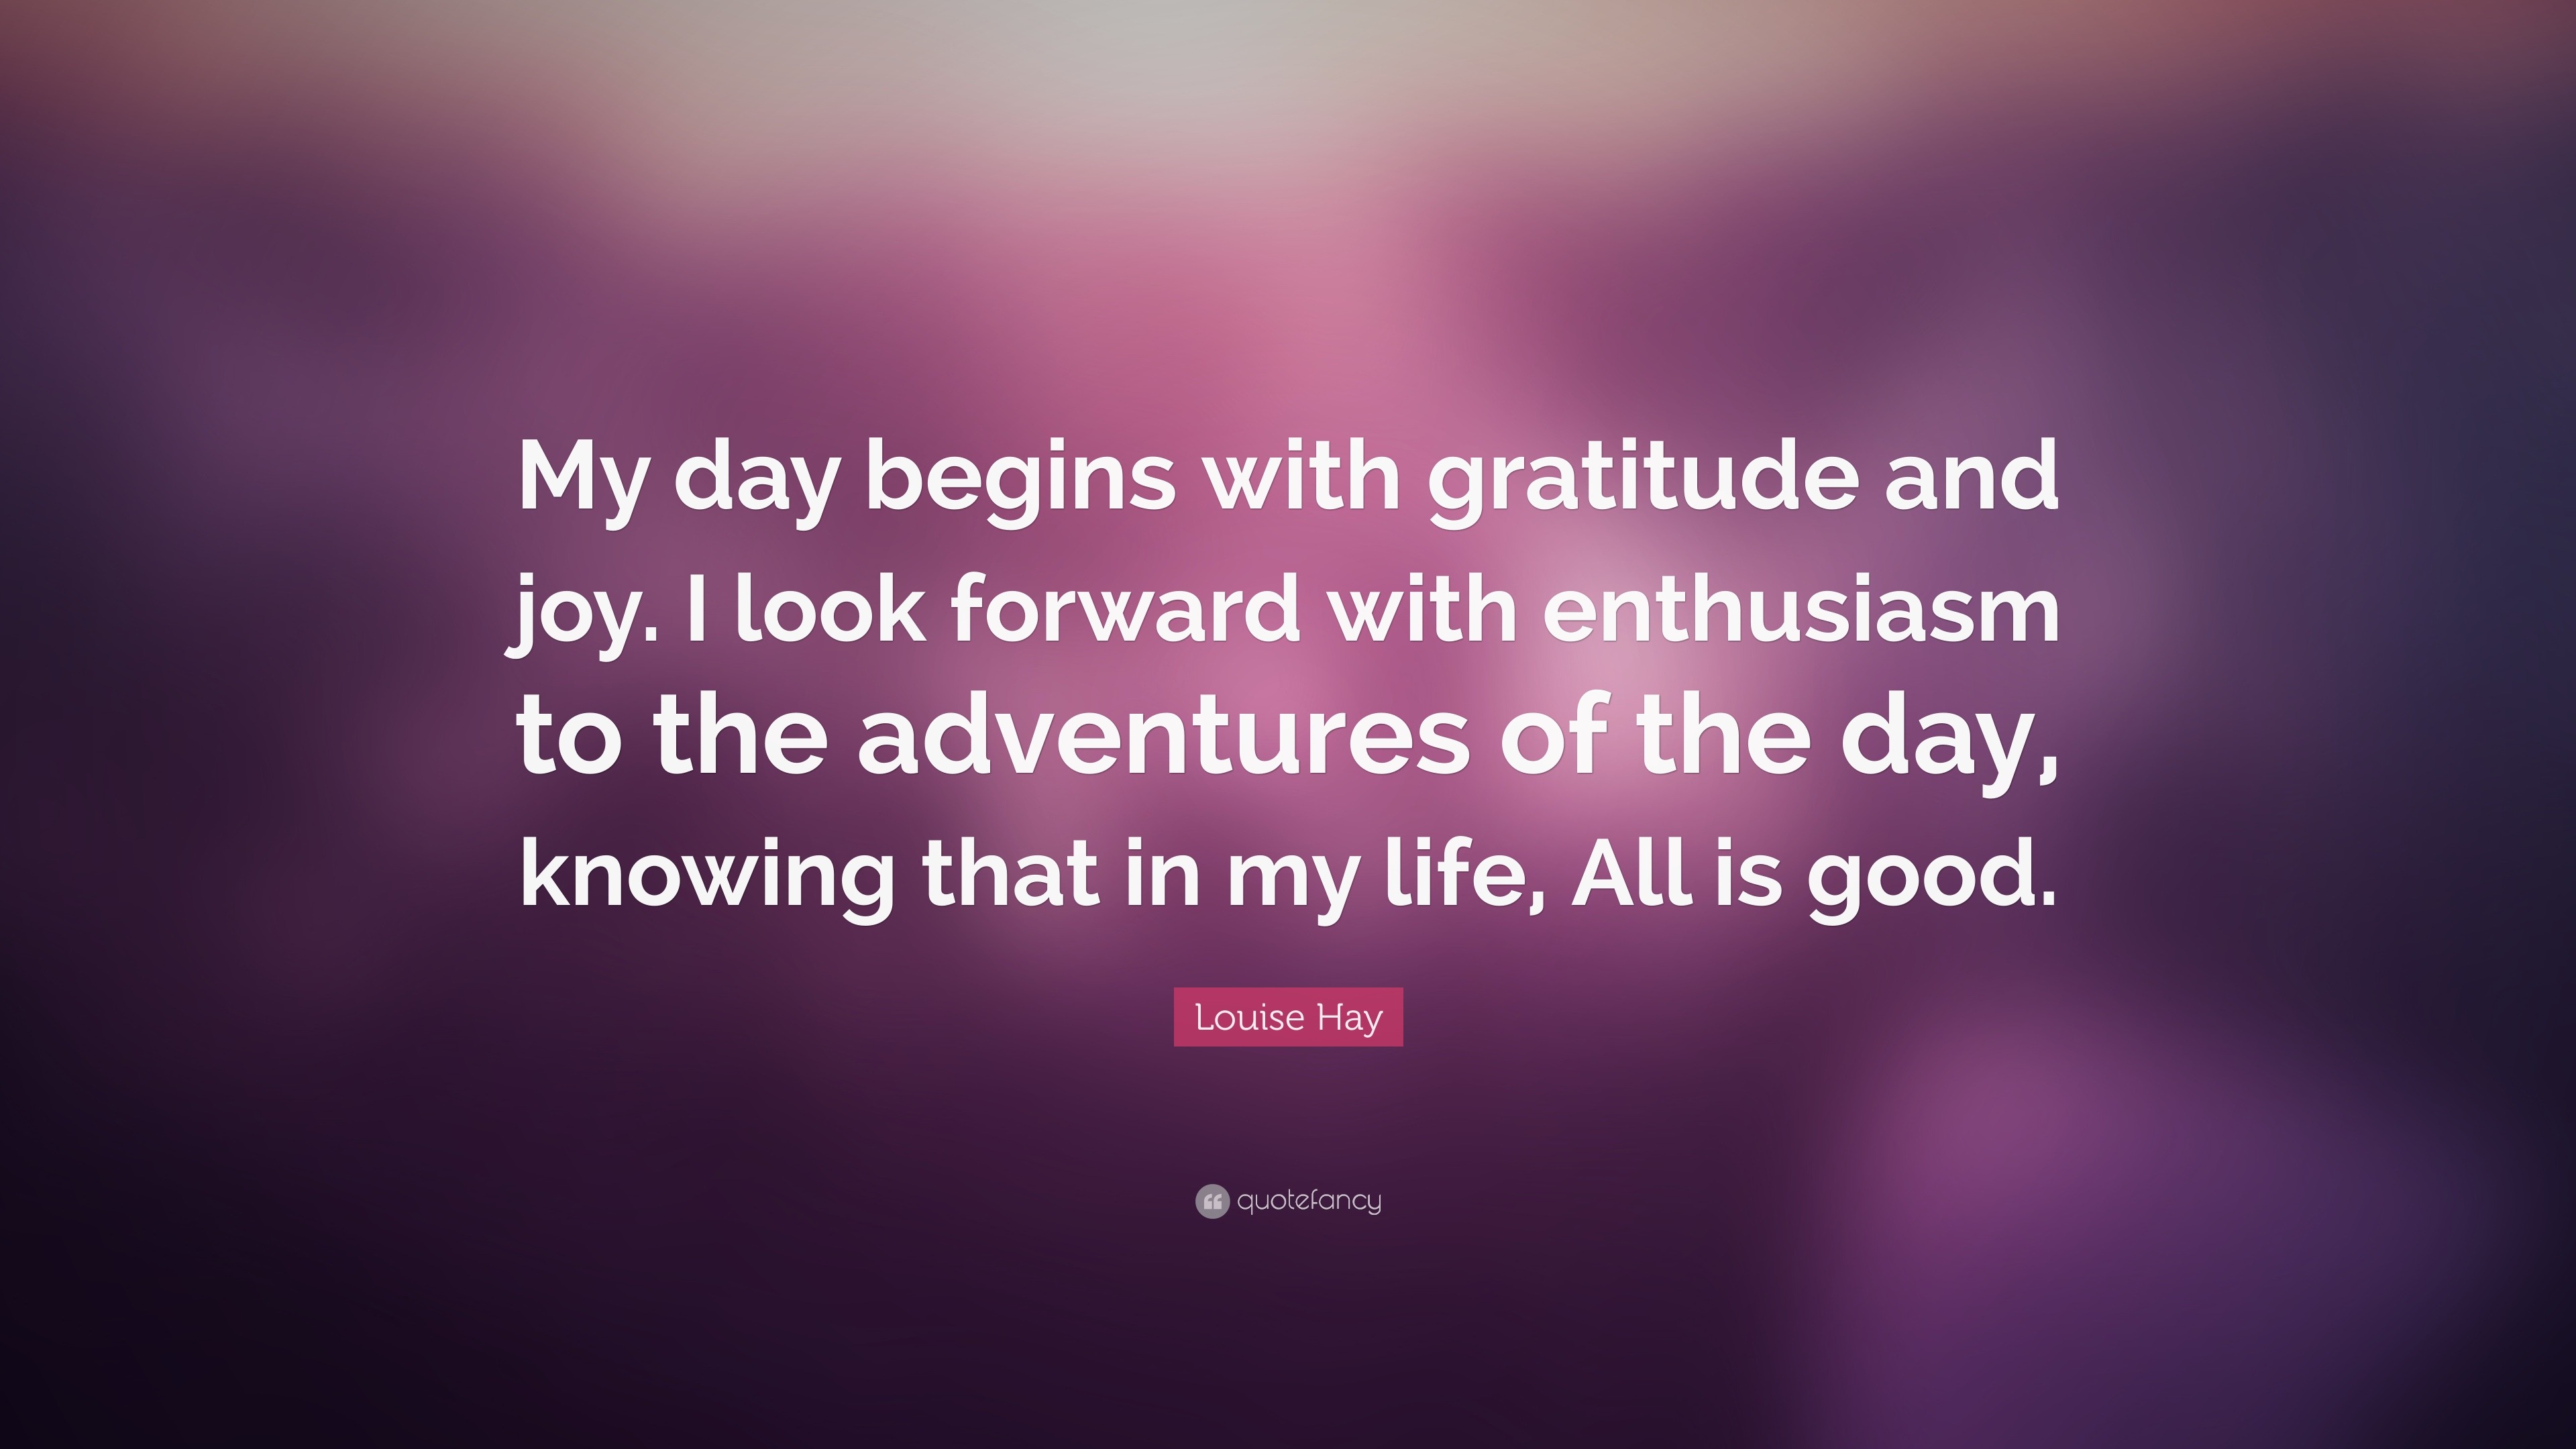 Louise Hay Quote: “My day begins with gratitude and joy. I look forward  with enthusiasm to the adventures of the day, knowing that in my li”